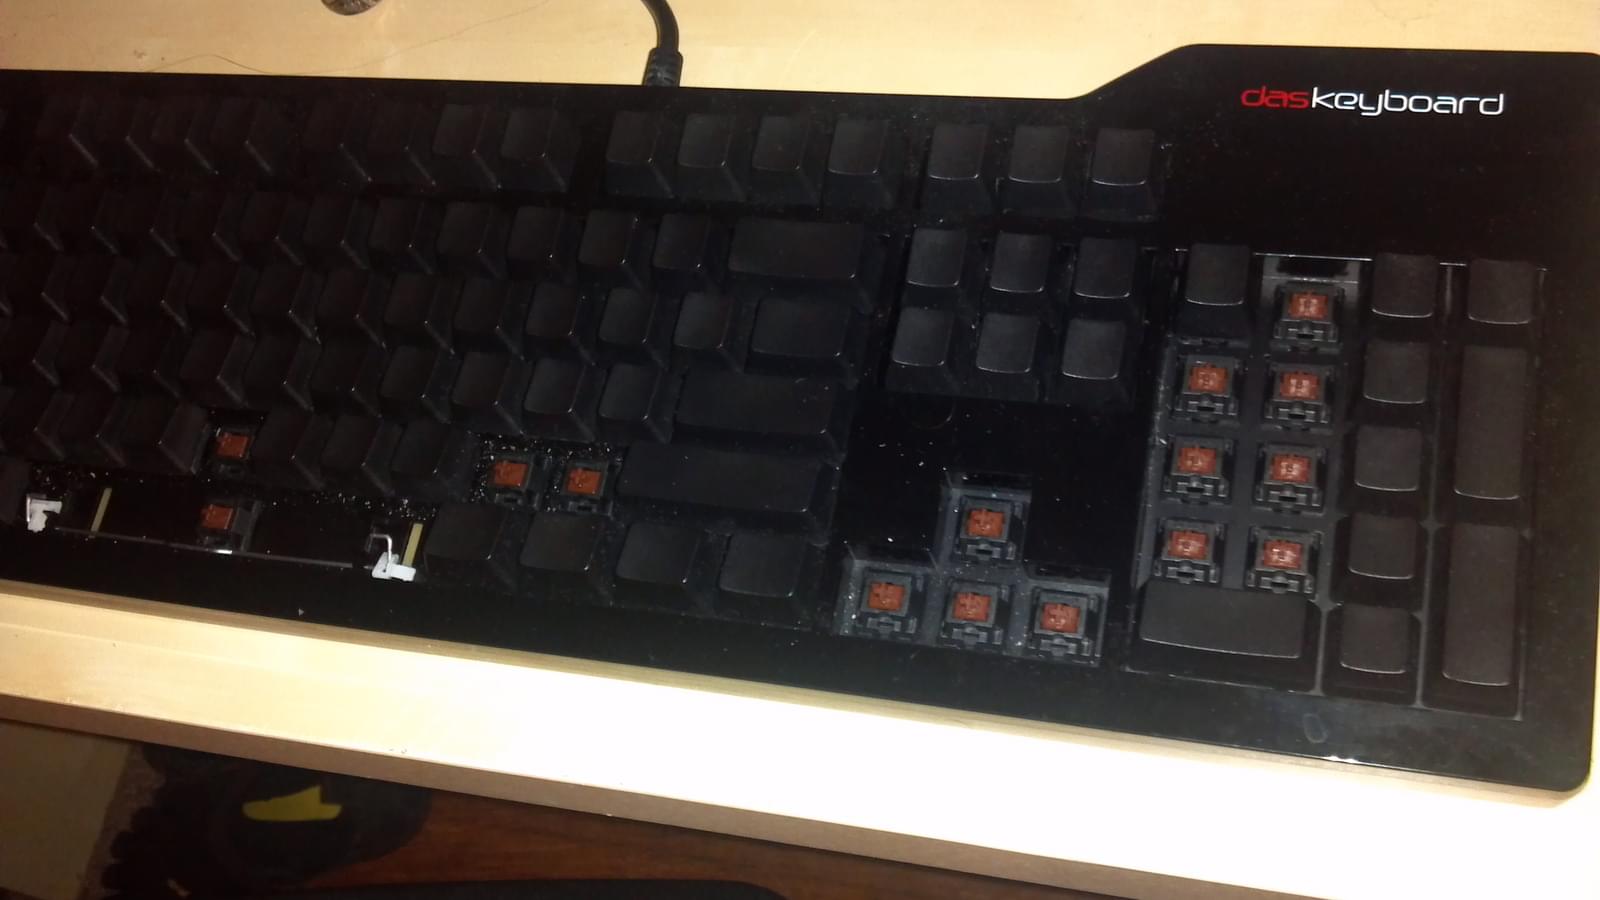 Das Keyboard with some Keycaps Removed